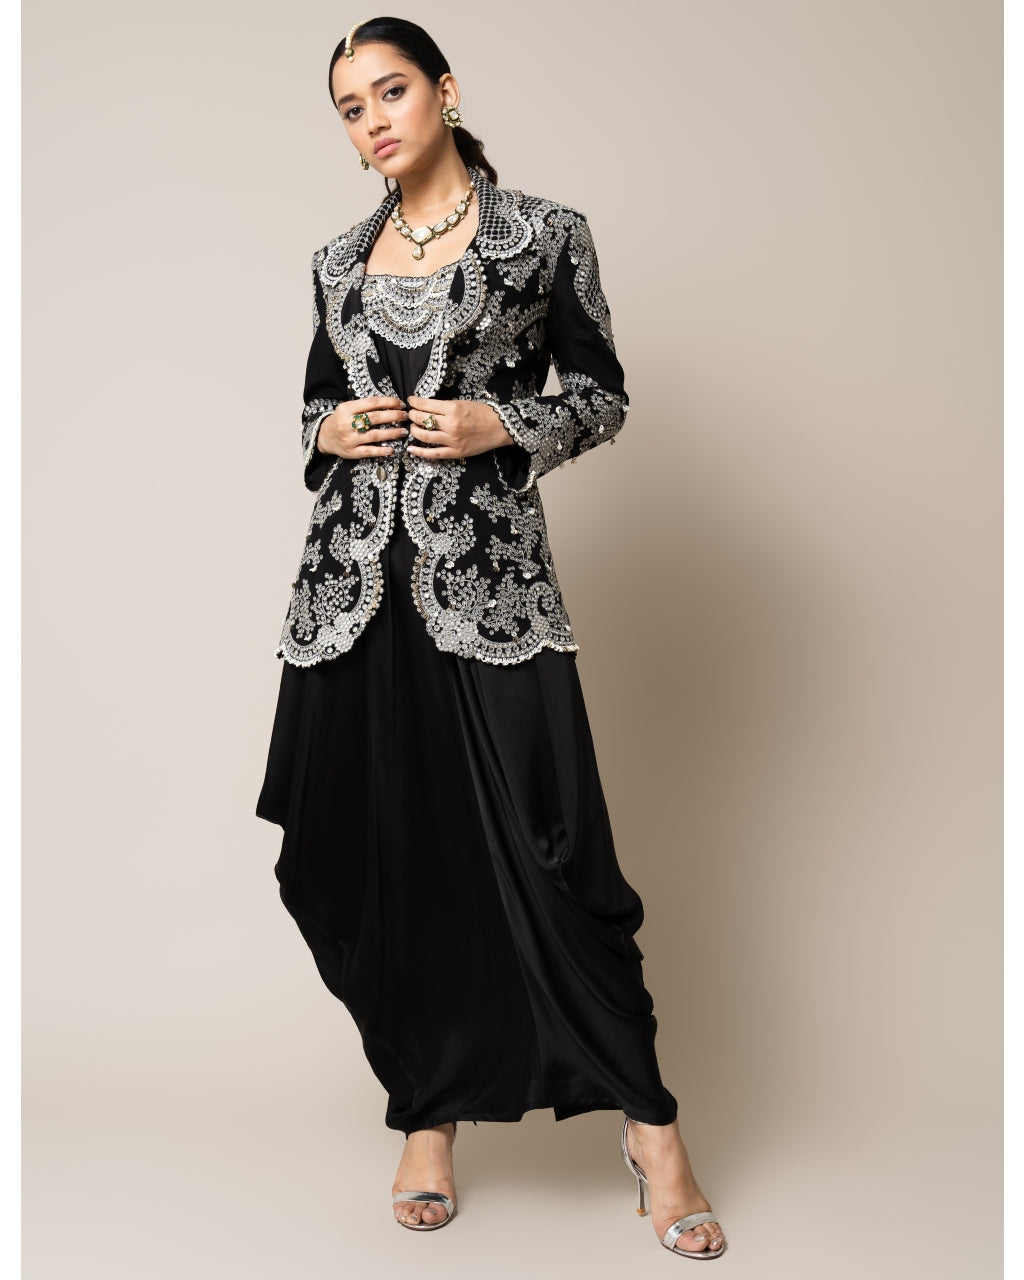 Off white color Indo western Gown with outer jacket buy in Gurgaon